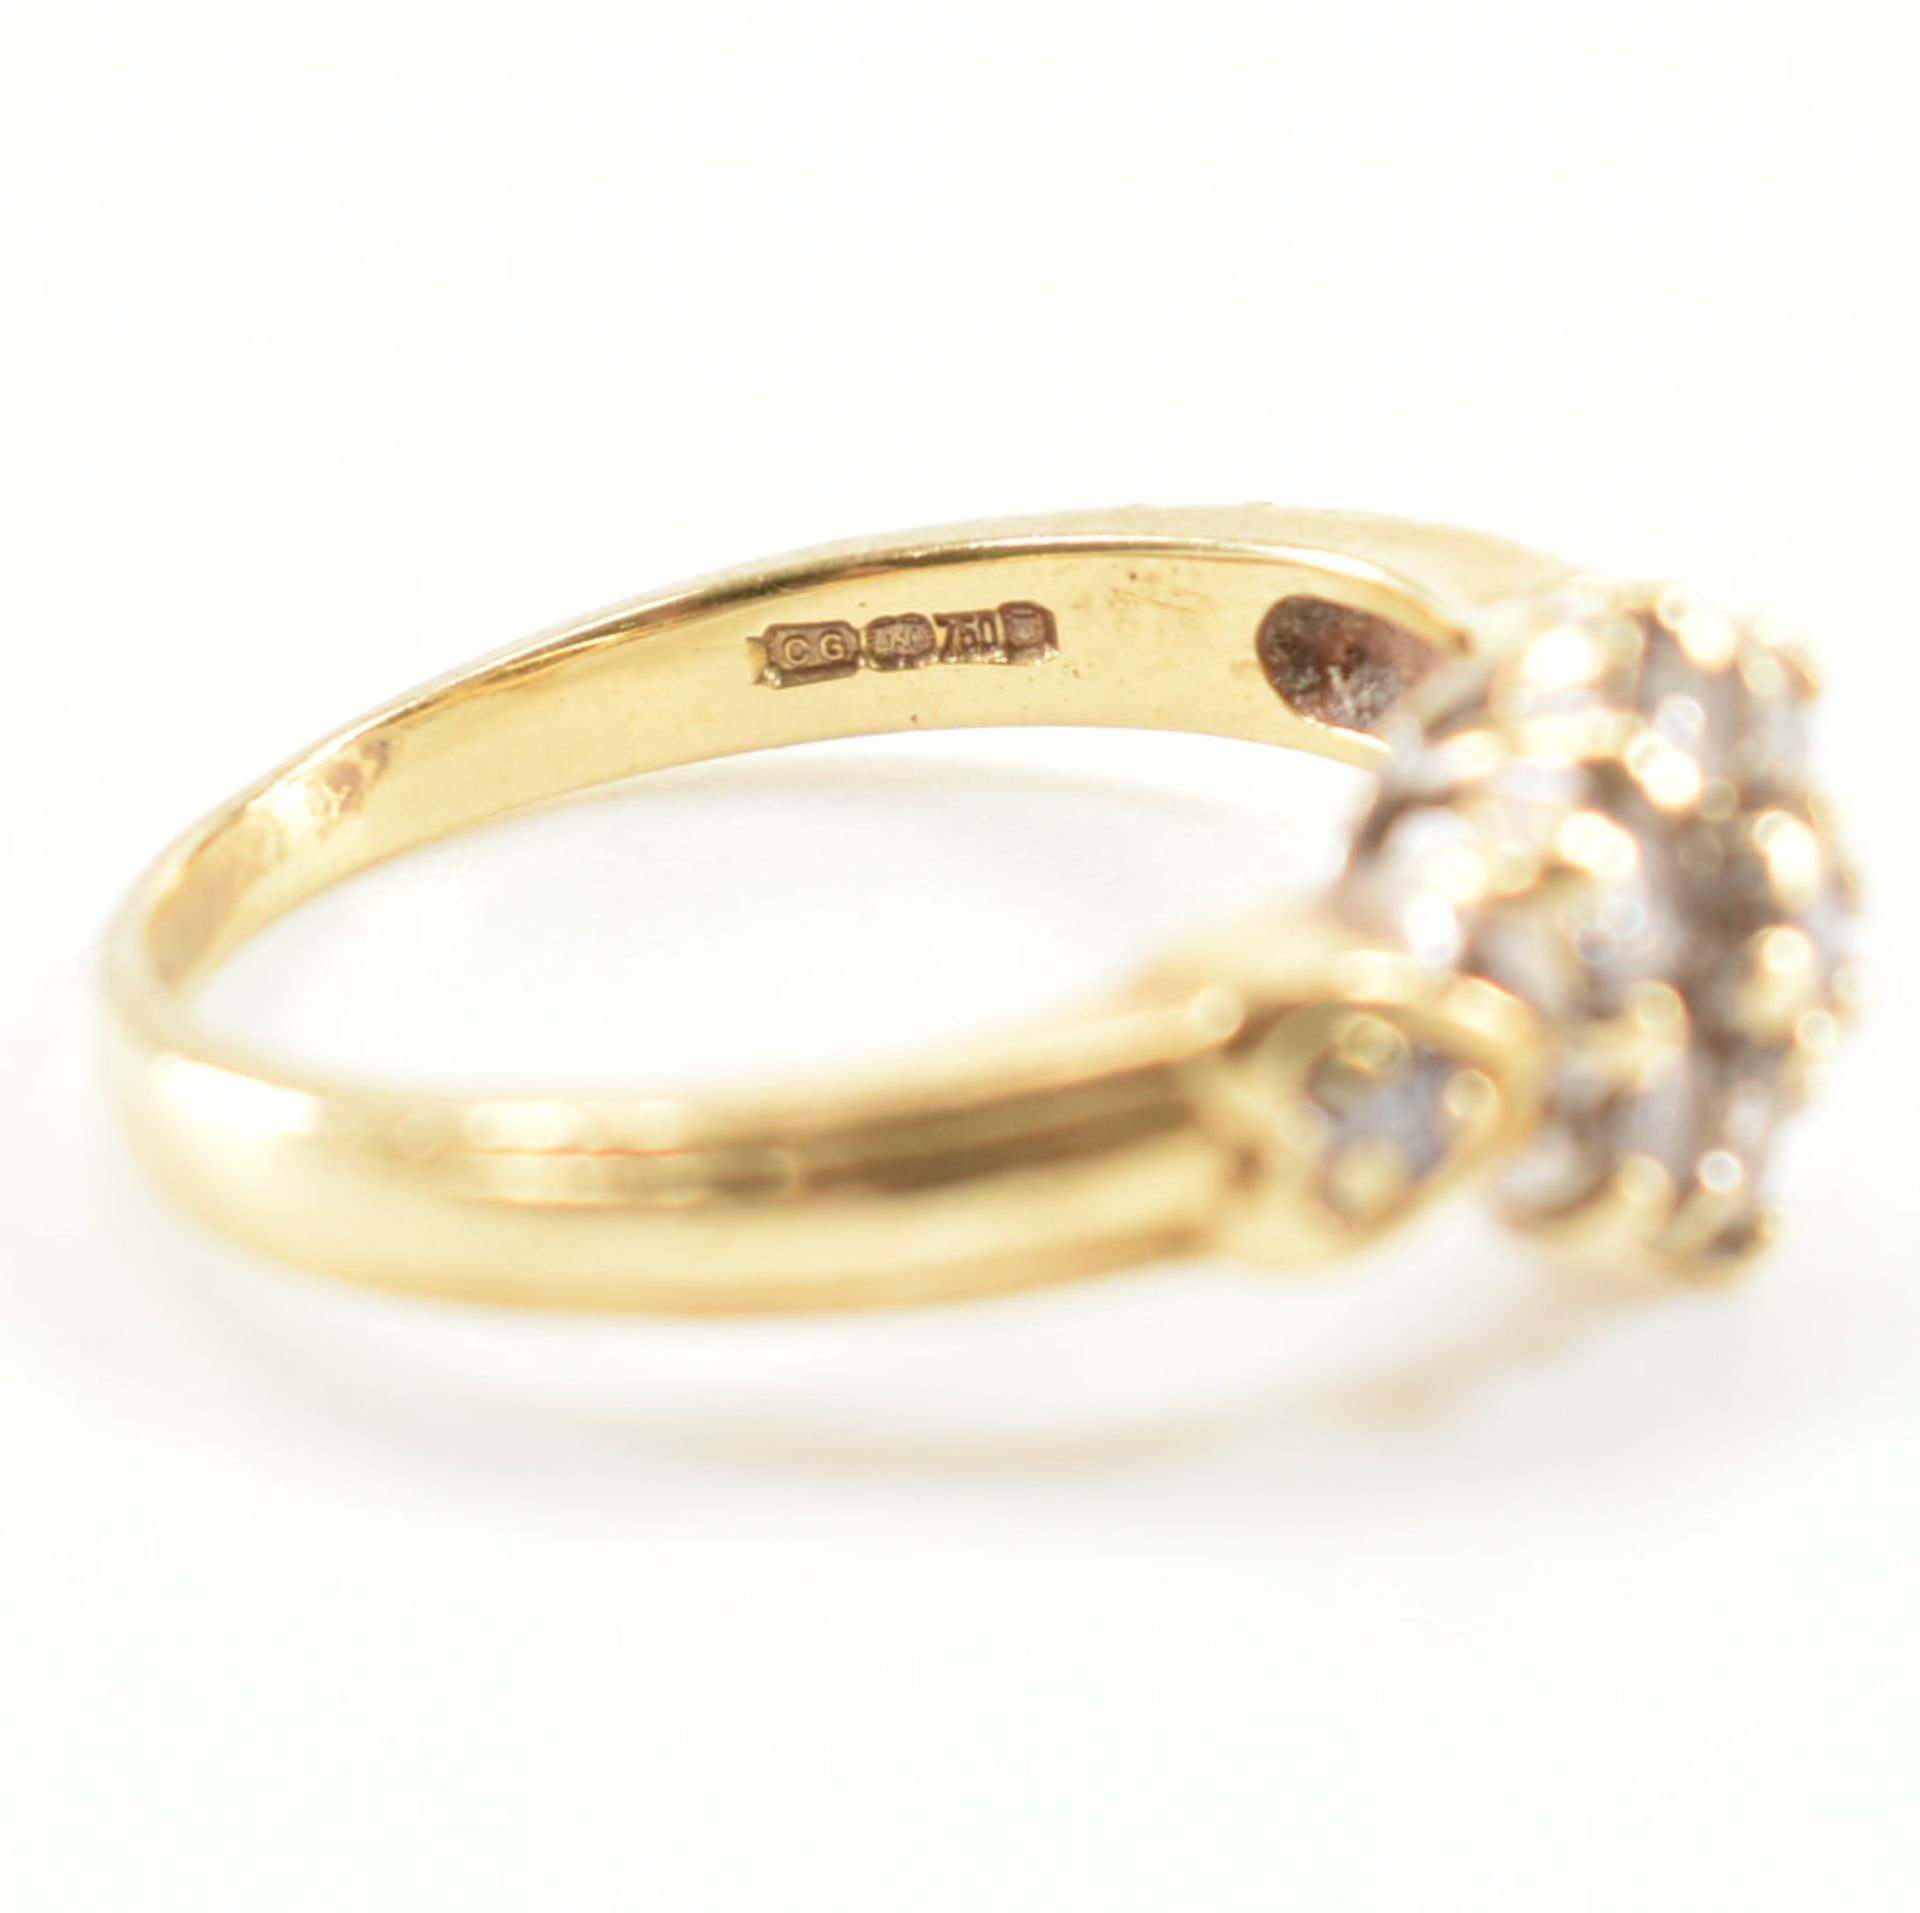 HALLMARKED 18CT GOLD & DIAMOND CLUSTER RING - Image 8 of 9